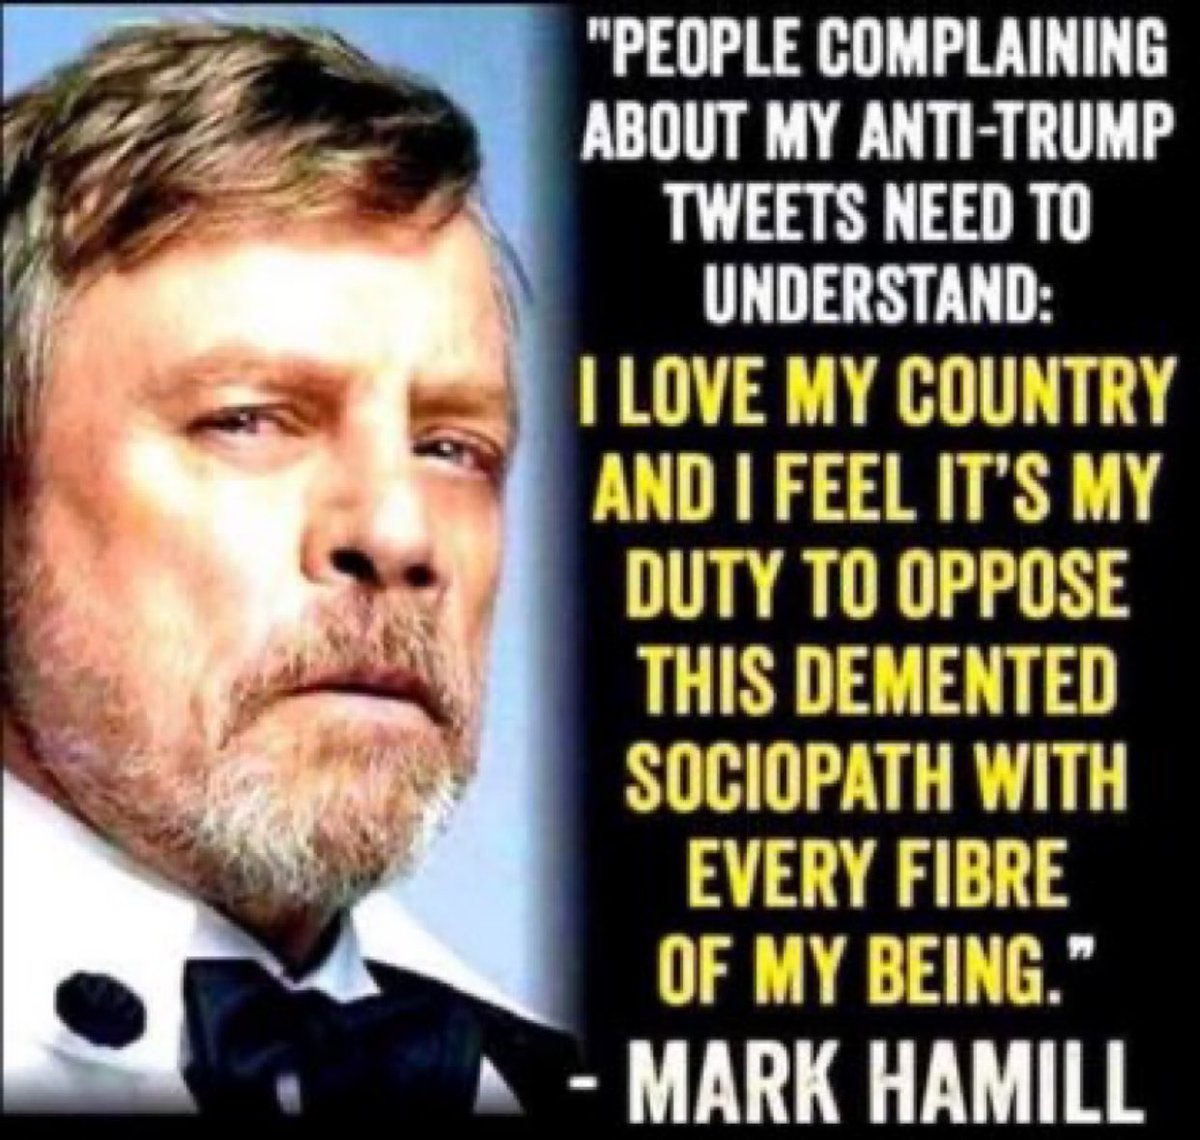 Is there a greater force than @MarkHamill?